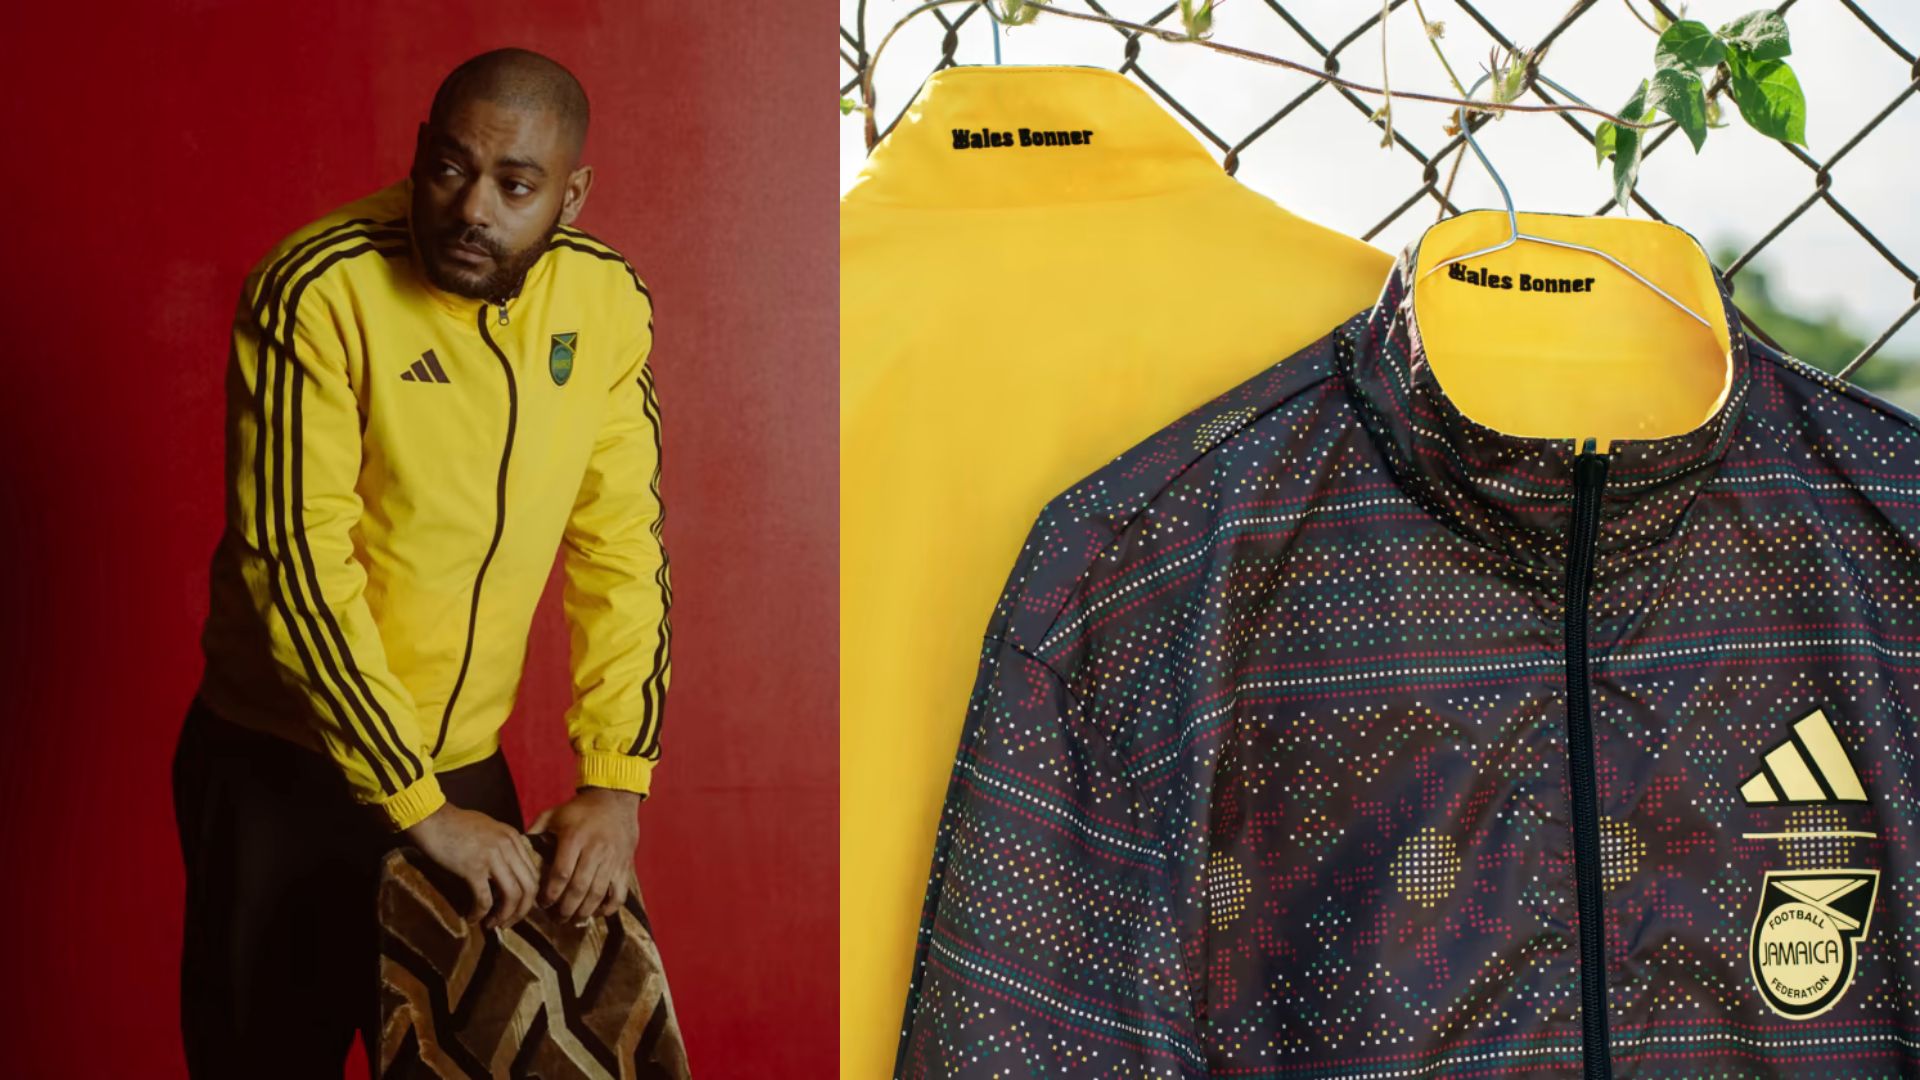 I found the perfect Jamaica anthem jacket ahead of Black Friday - and there are some great alternatives available